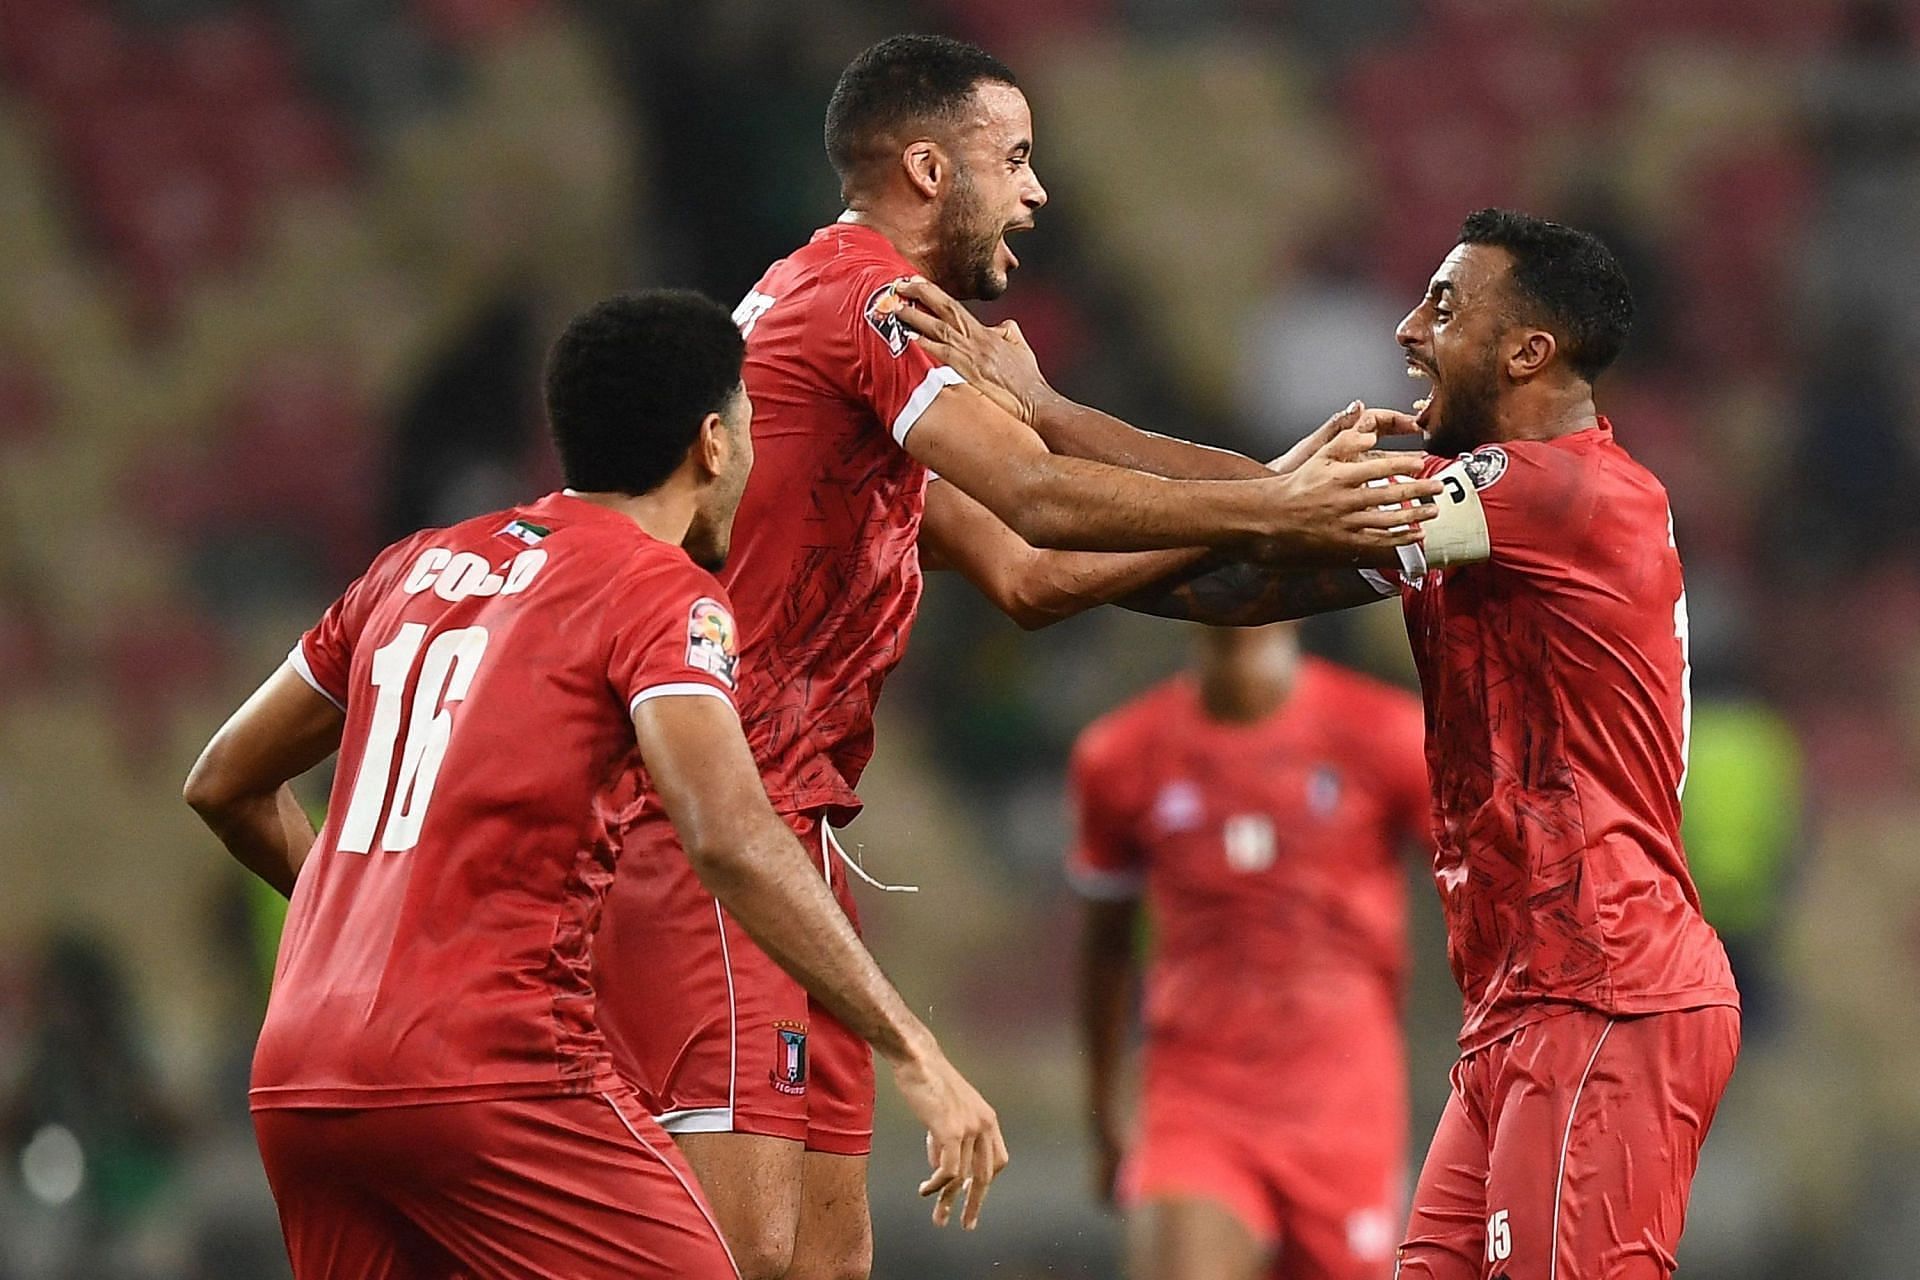 Equatorial Guinea will face Namibia on Wednesday 